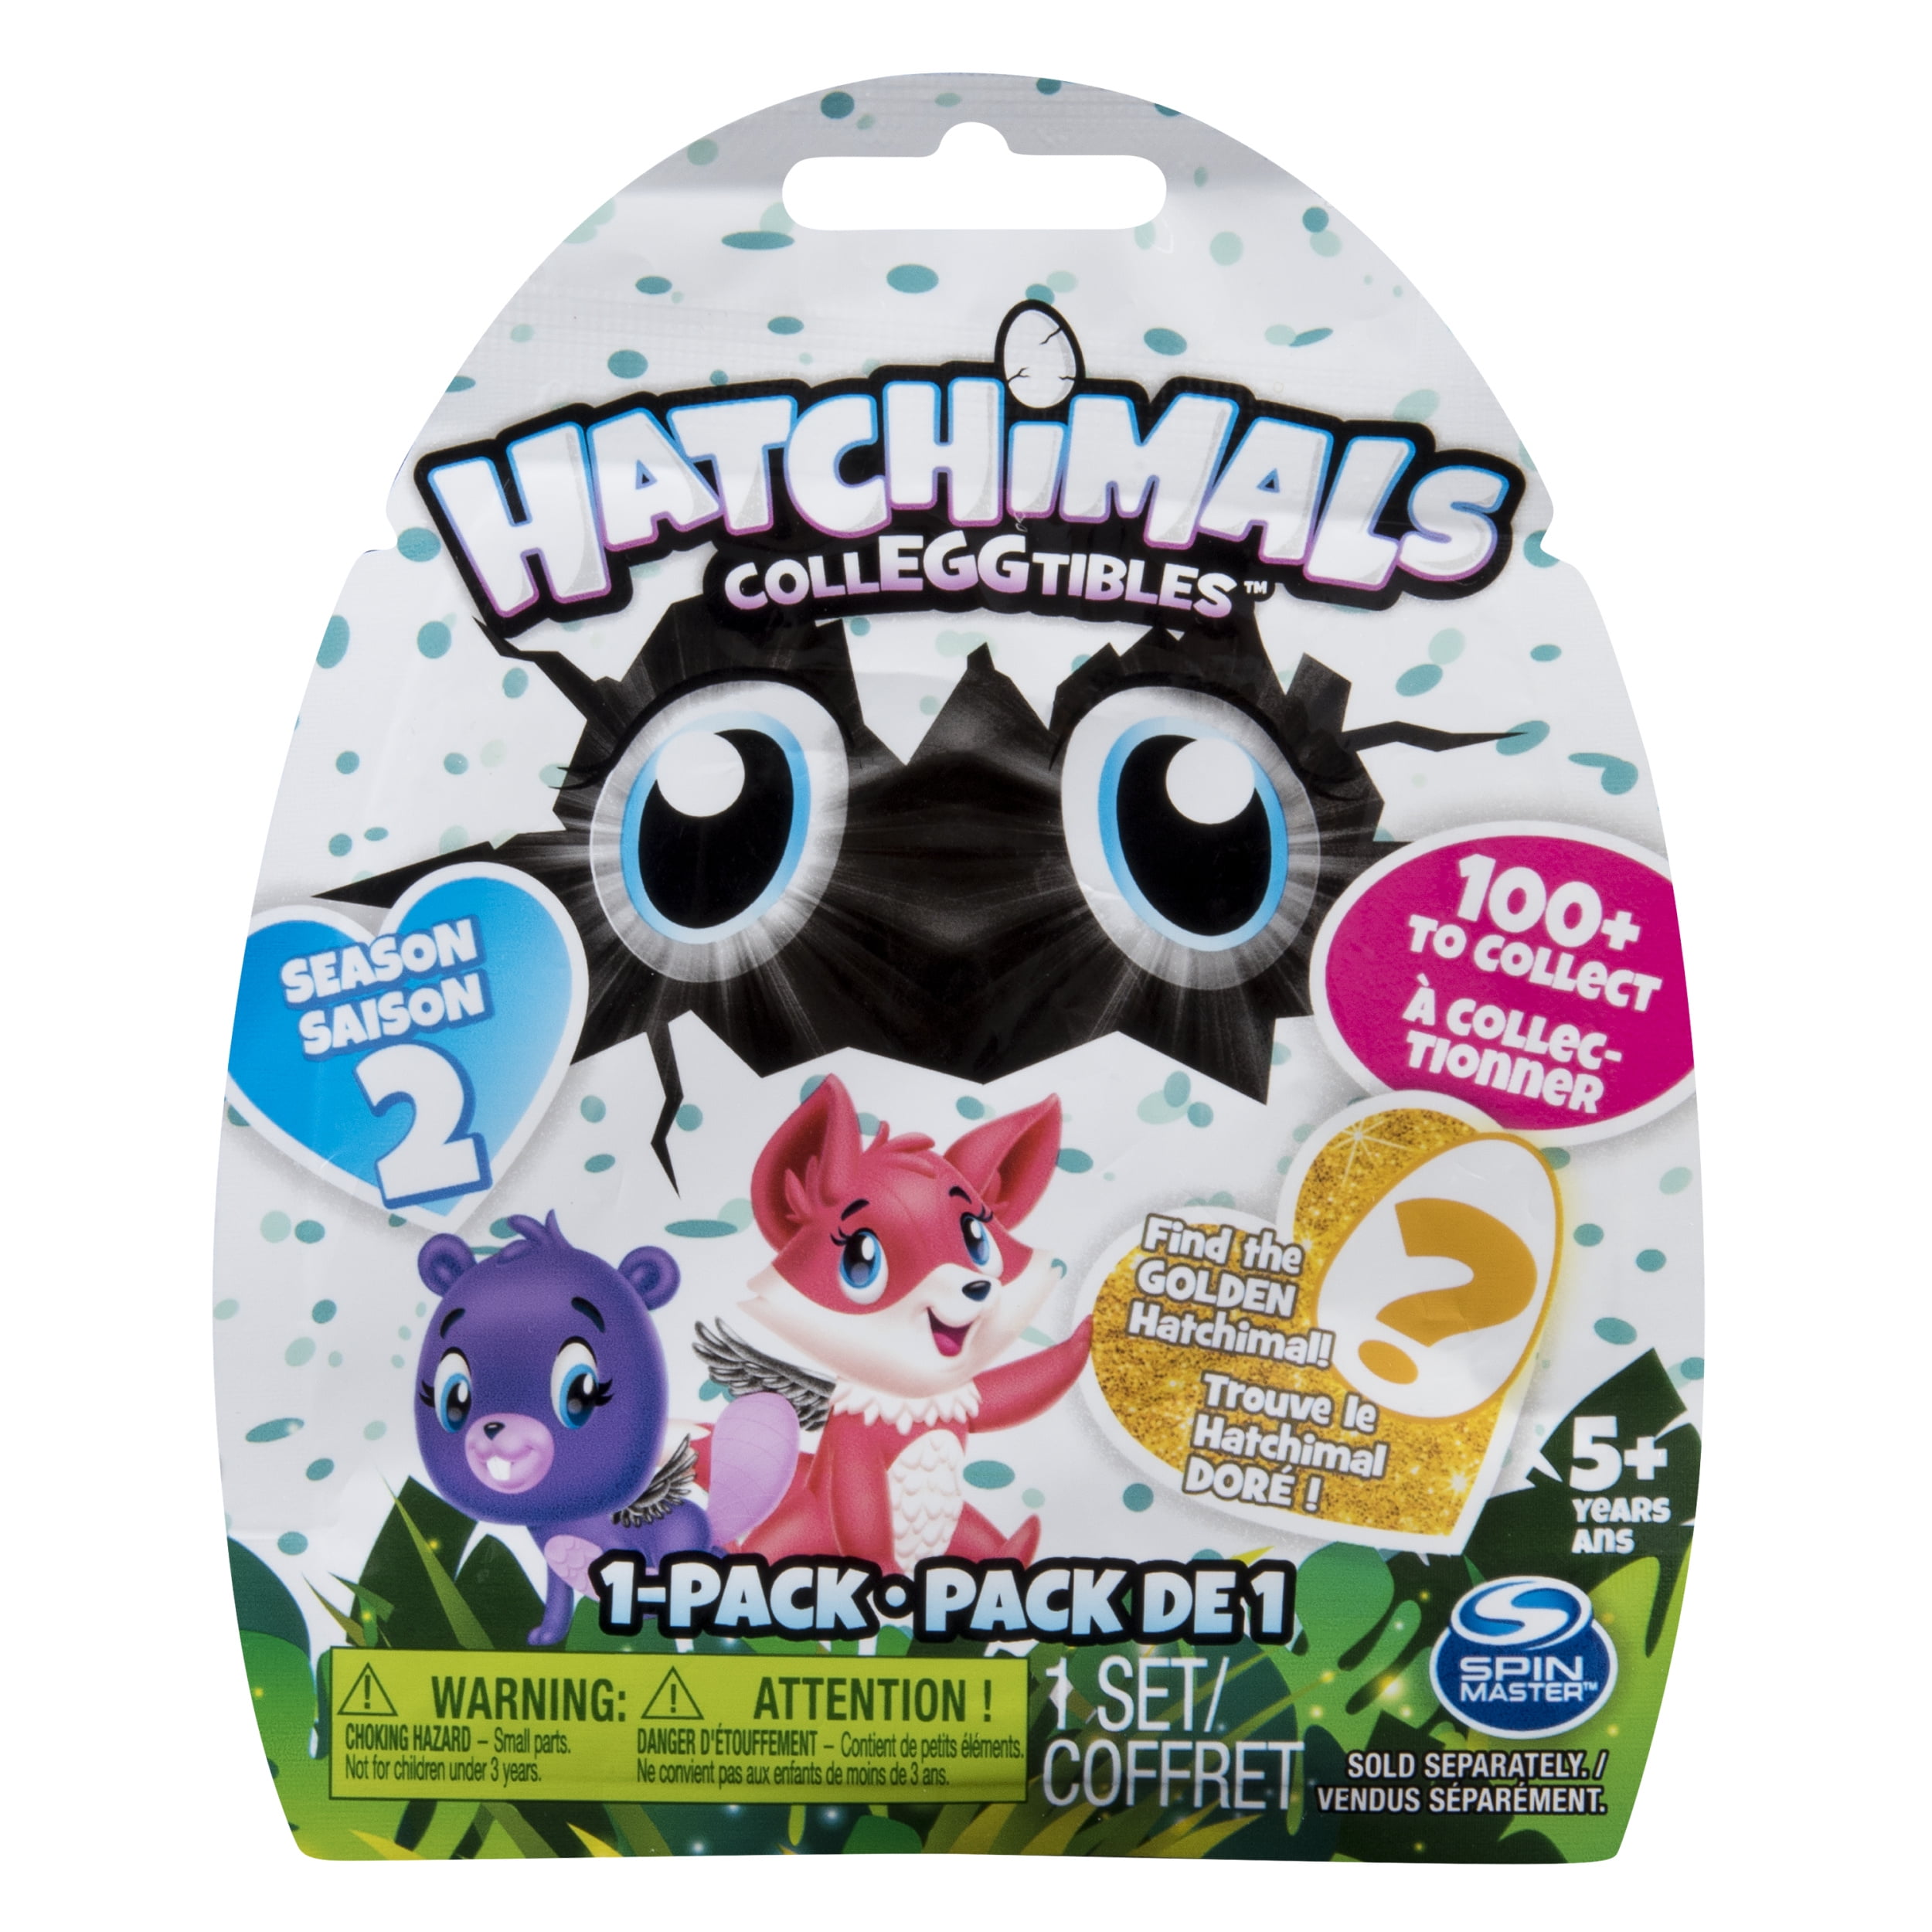 Details about   Hatchimals Colleggtibles Season 2 ---2 Pack Collectible egg with Nest 